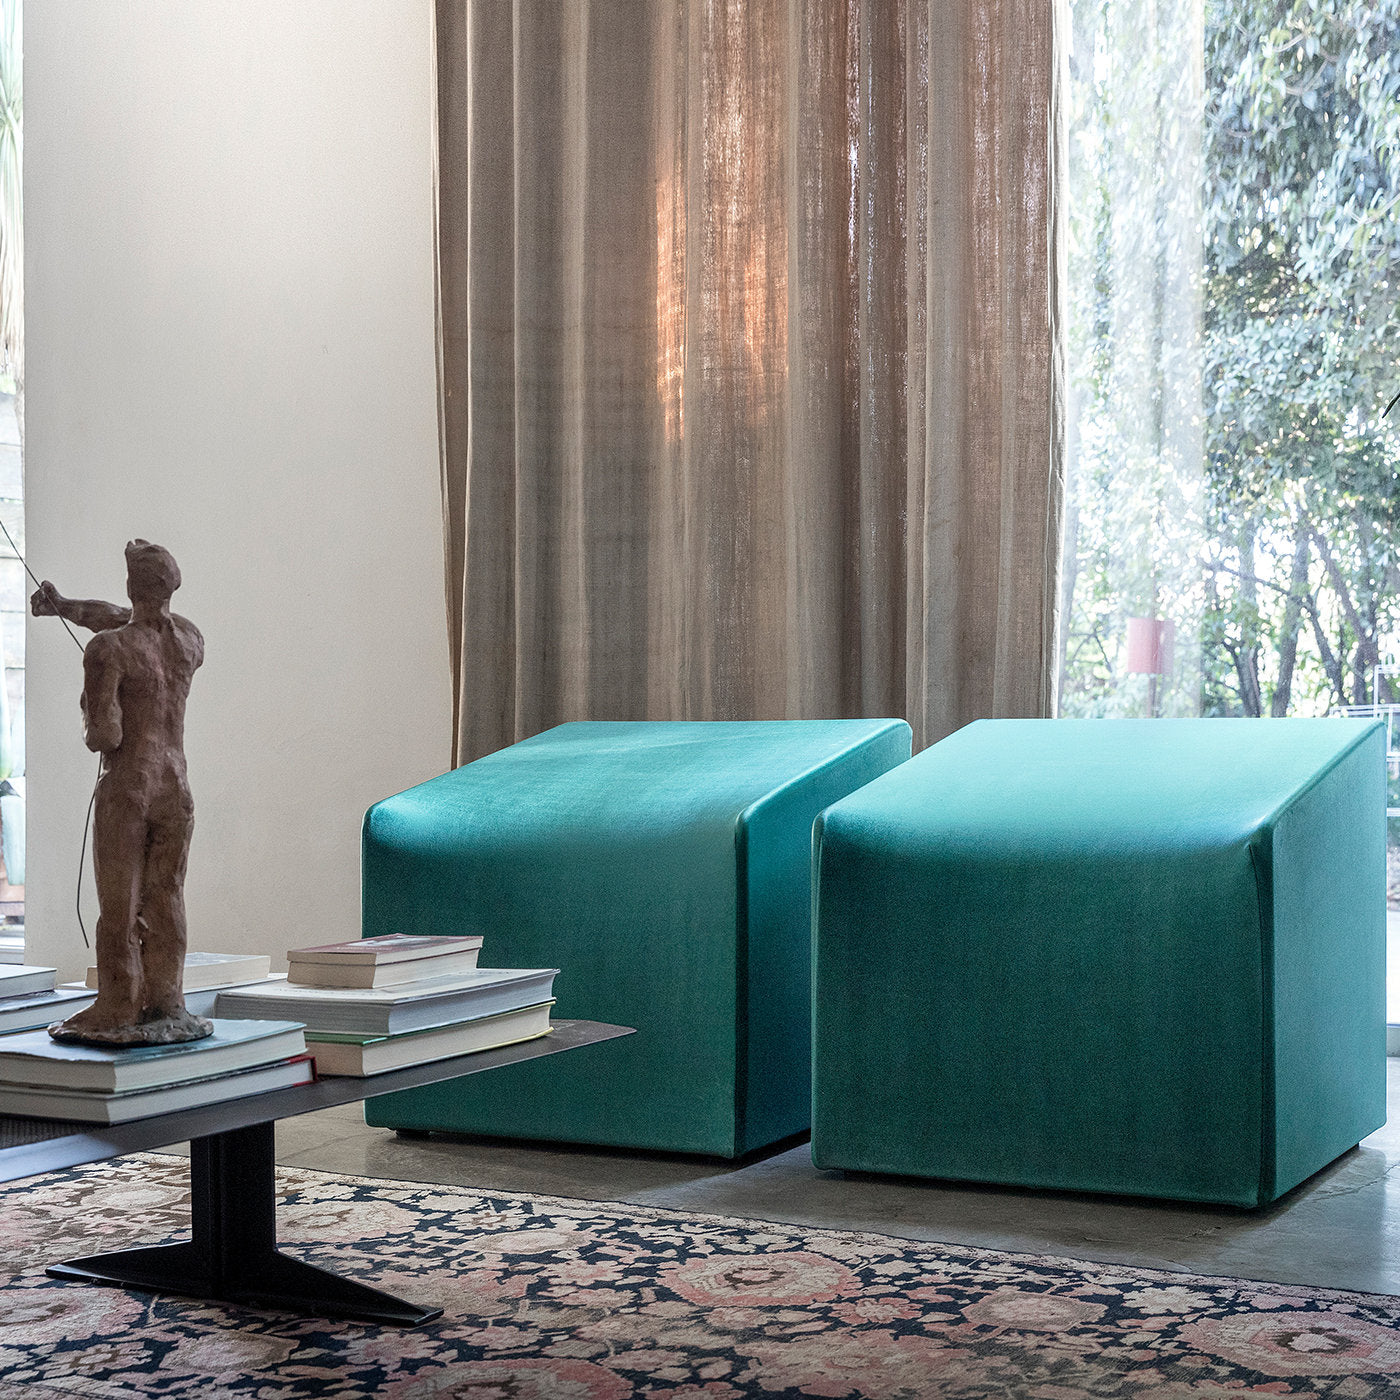 Gossip Emerald Armchair by Idelfonso Colombo - Alternative view 2